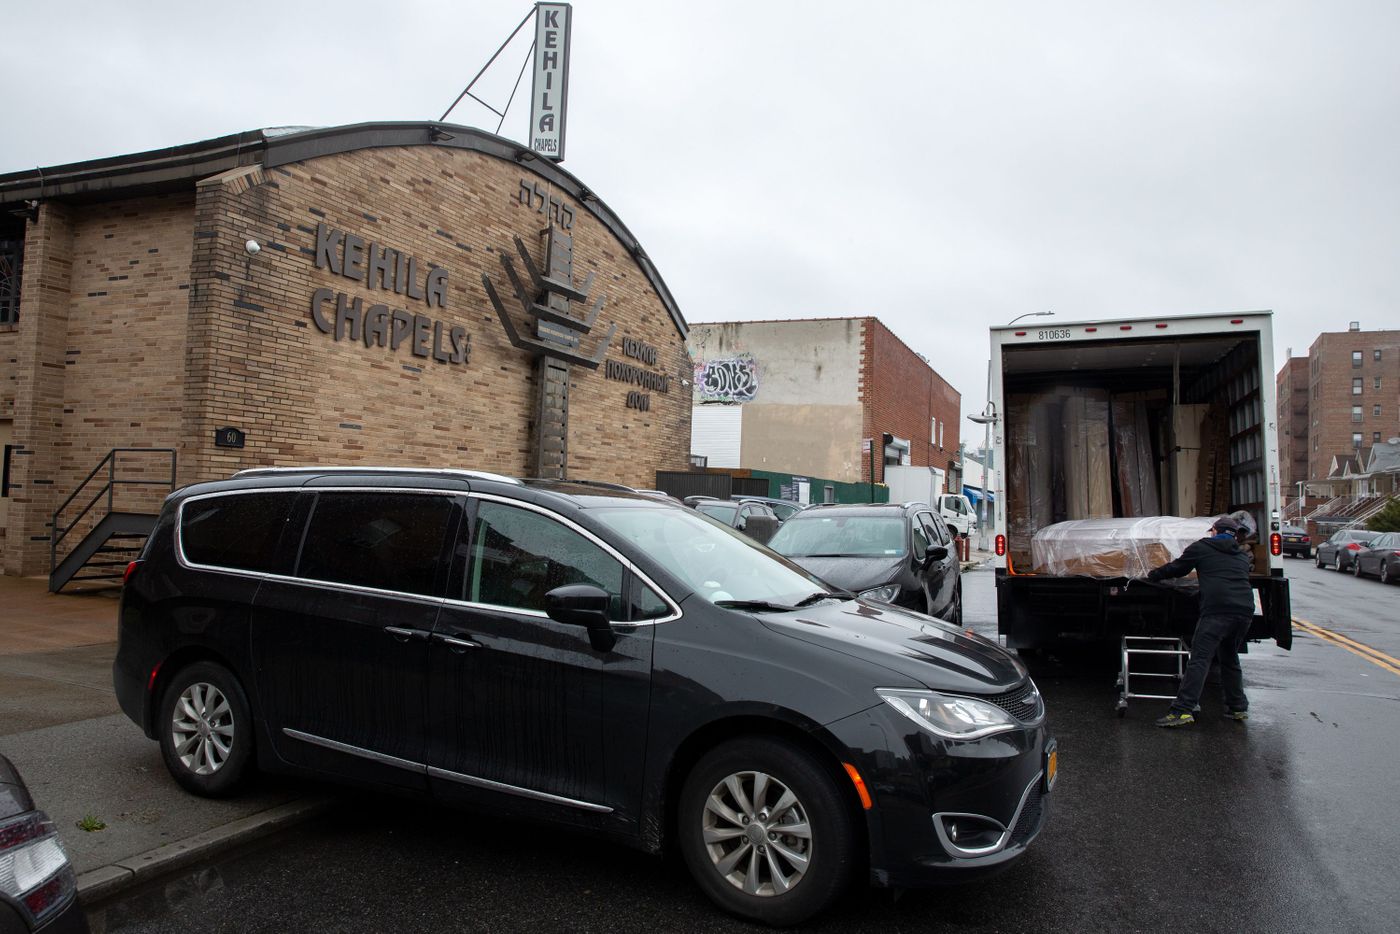 The Kahila Chapel in Brighton Beach received a delivery of coffins during the coronavirus outbreak, April 30, 2020.